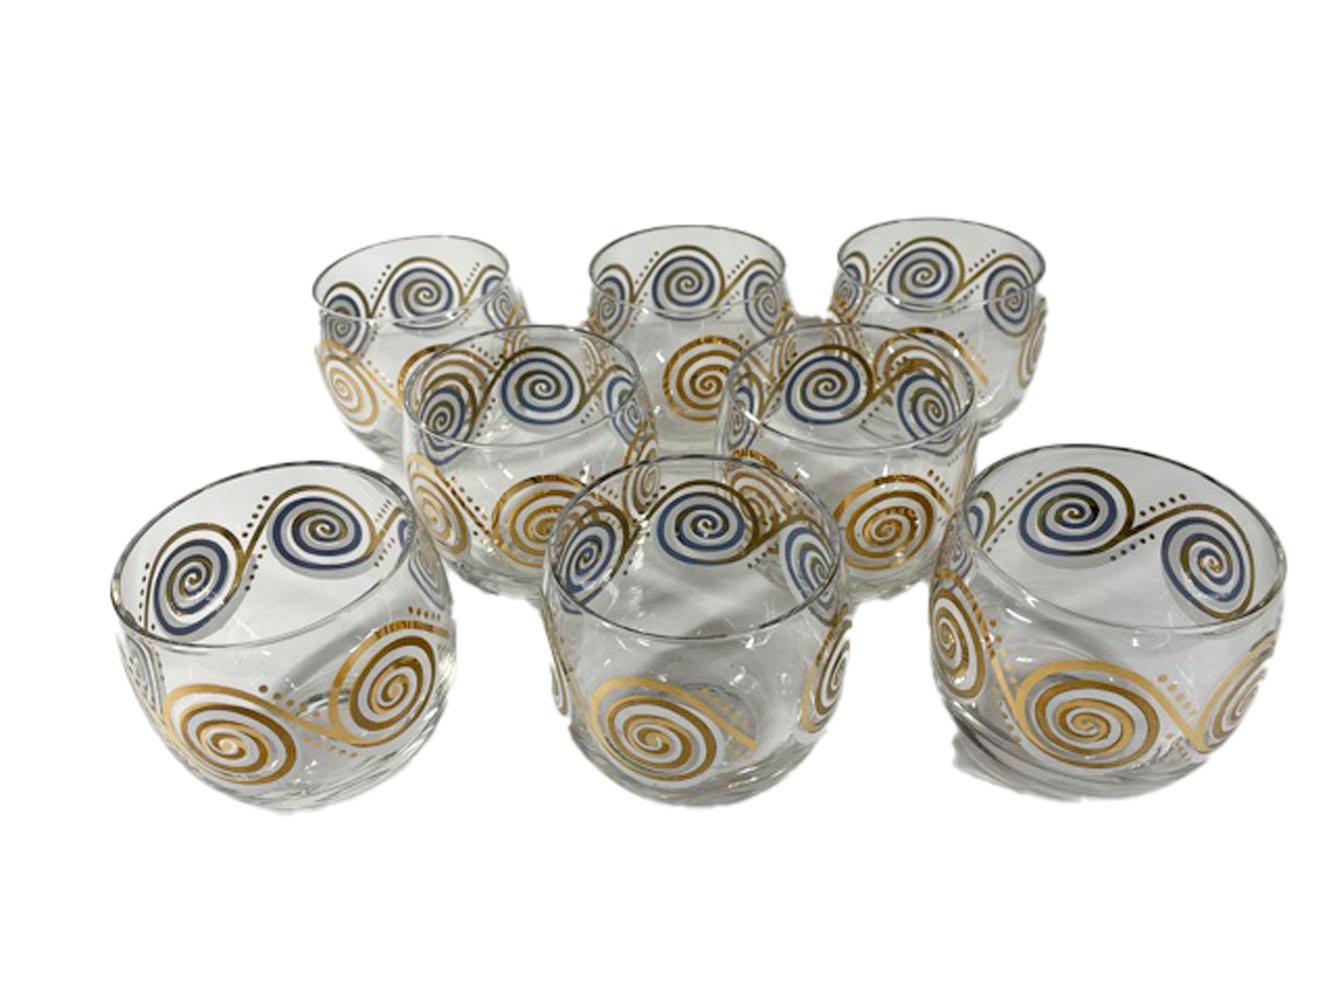 Metal Set of 8 Vintage Atomic Design Roly Poly Cocktail Glasses with Gold-Tone Caddy